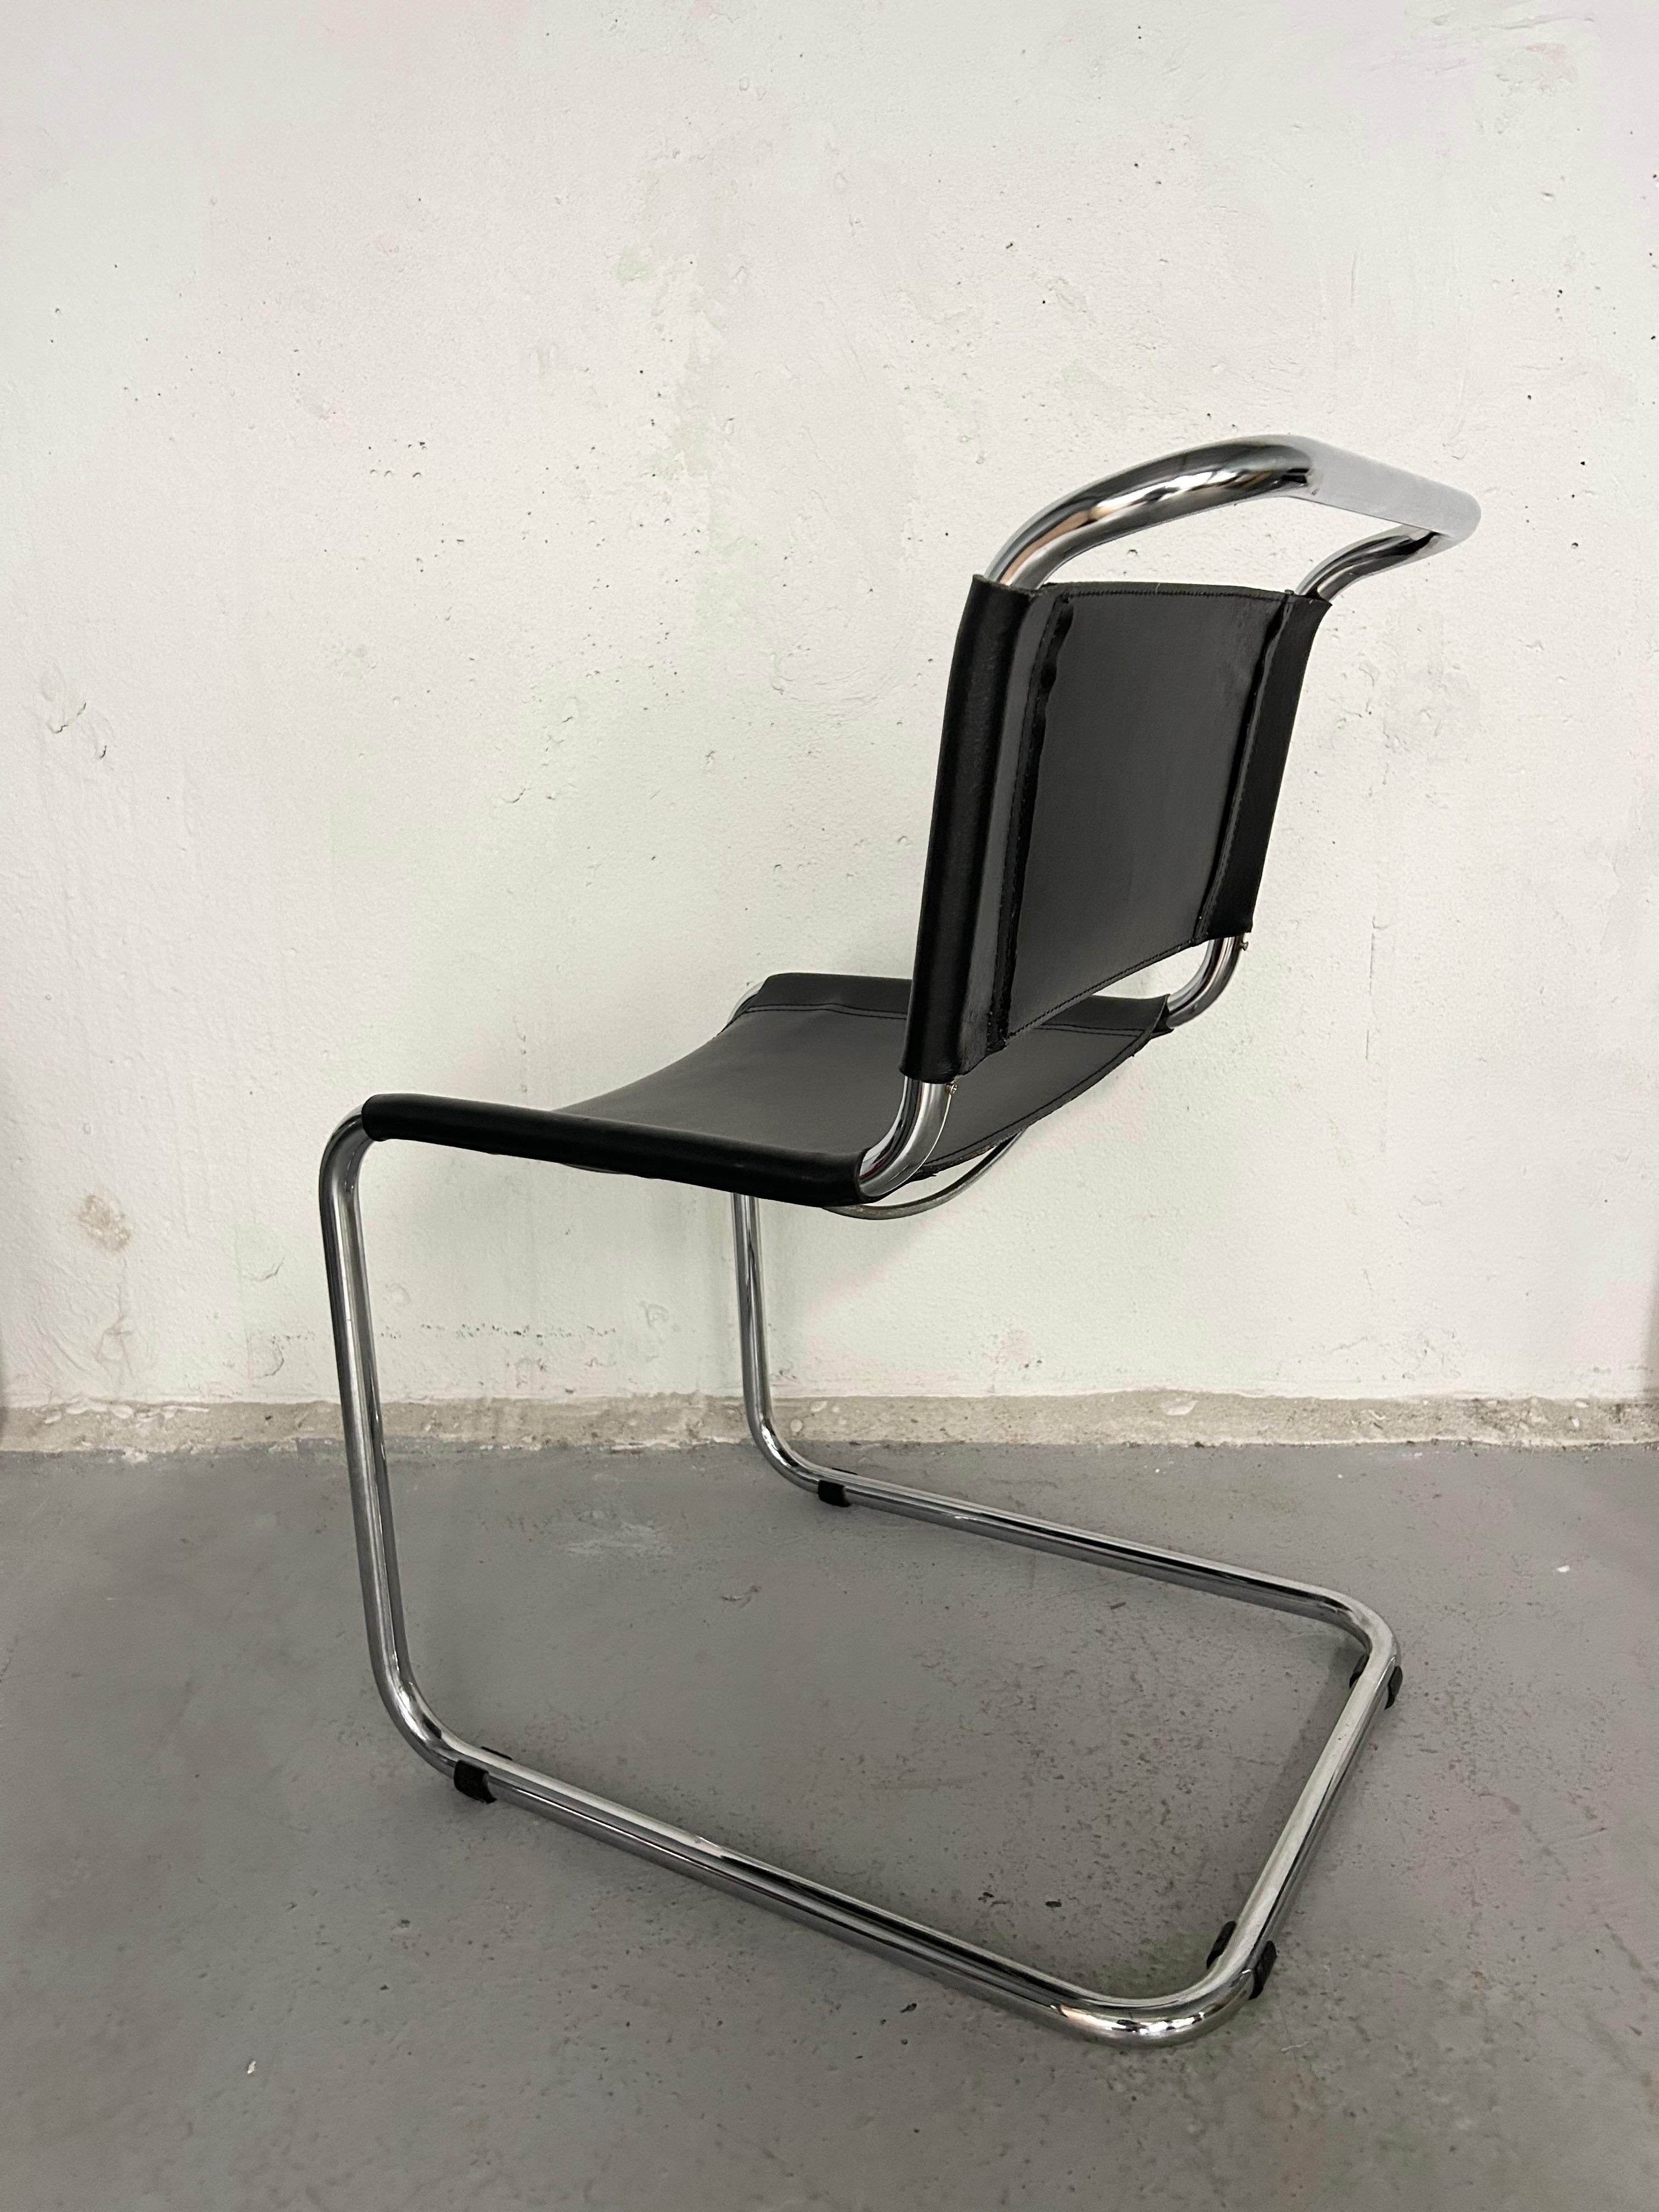 
1 Chair Available - Vintage chrome and leather cantilever chair. Mart Stam S33 replicas. Minimal wear

31.5” height
19” width
25” depth
17.5” seat height